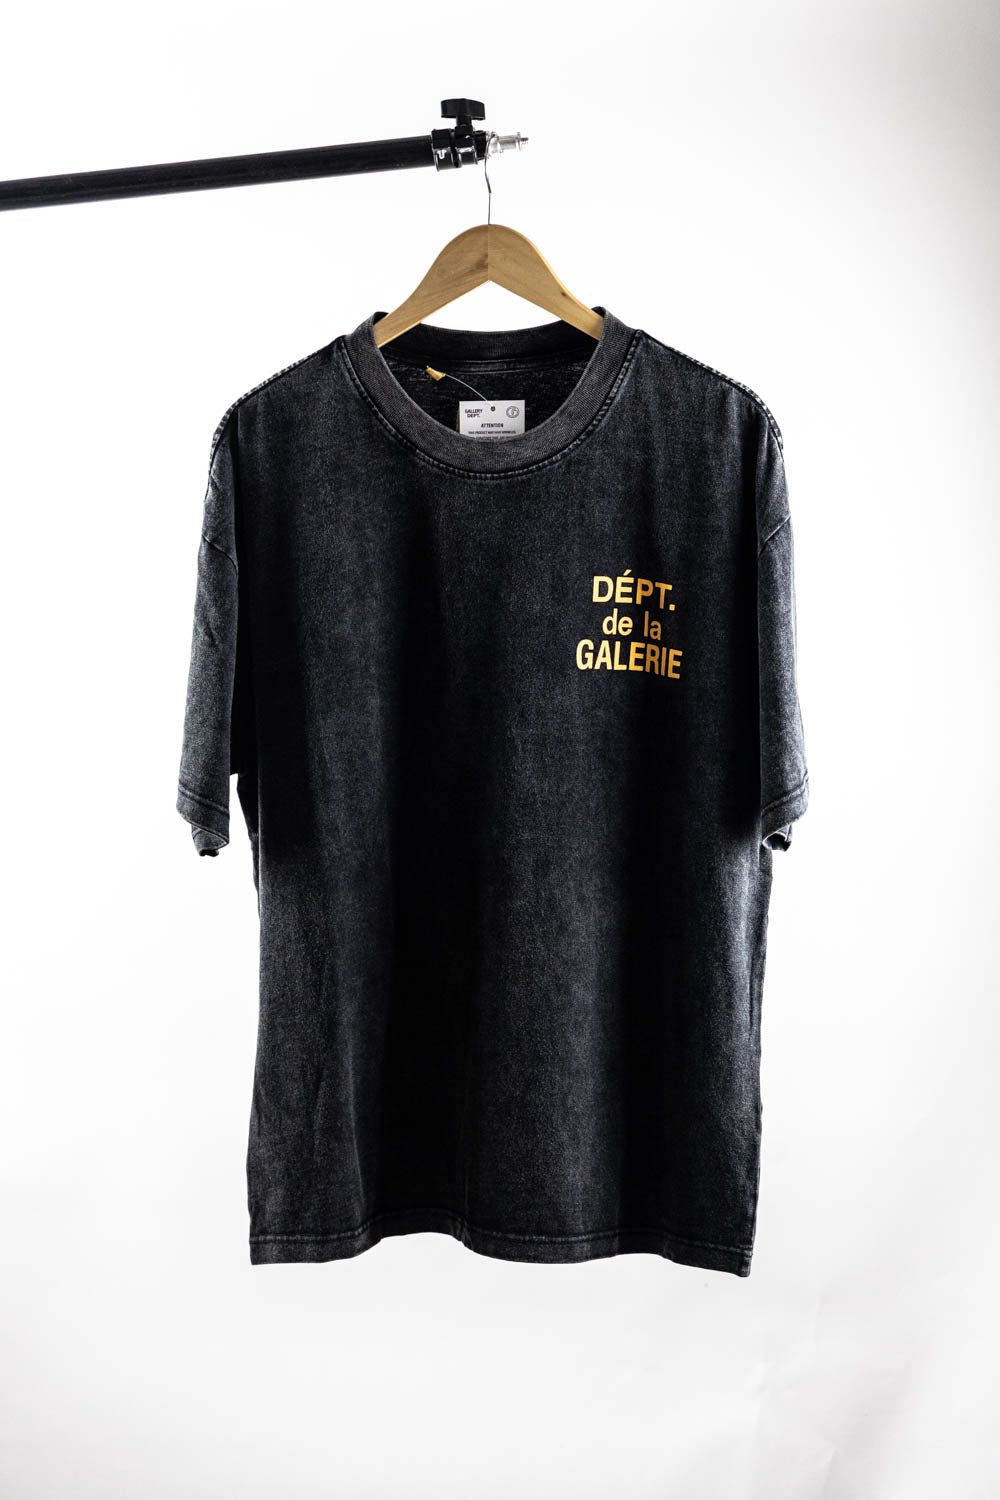 Gallery Dept. French T-Shirt Black